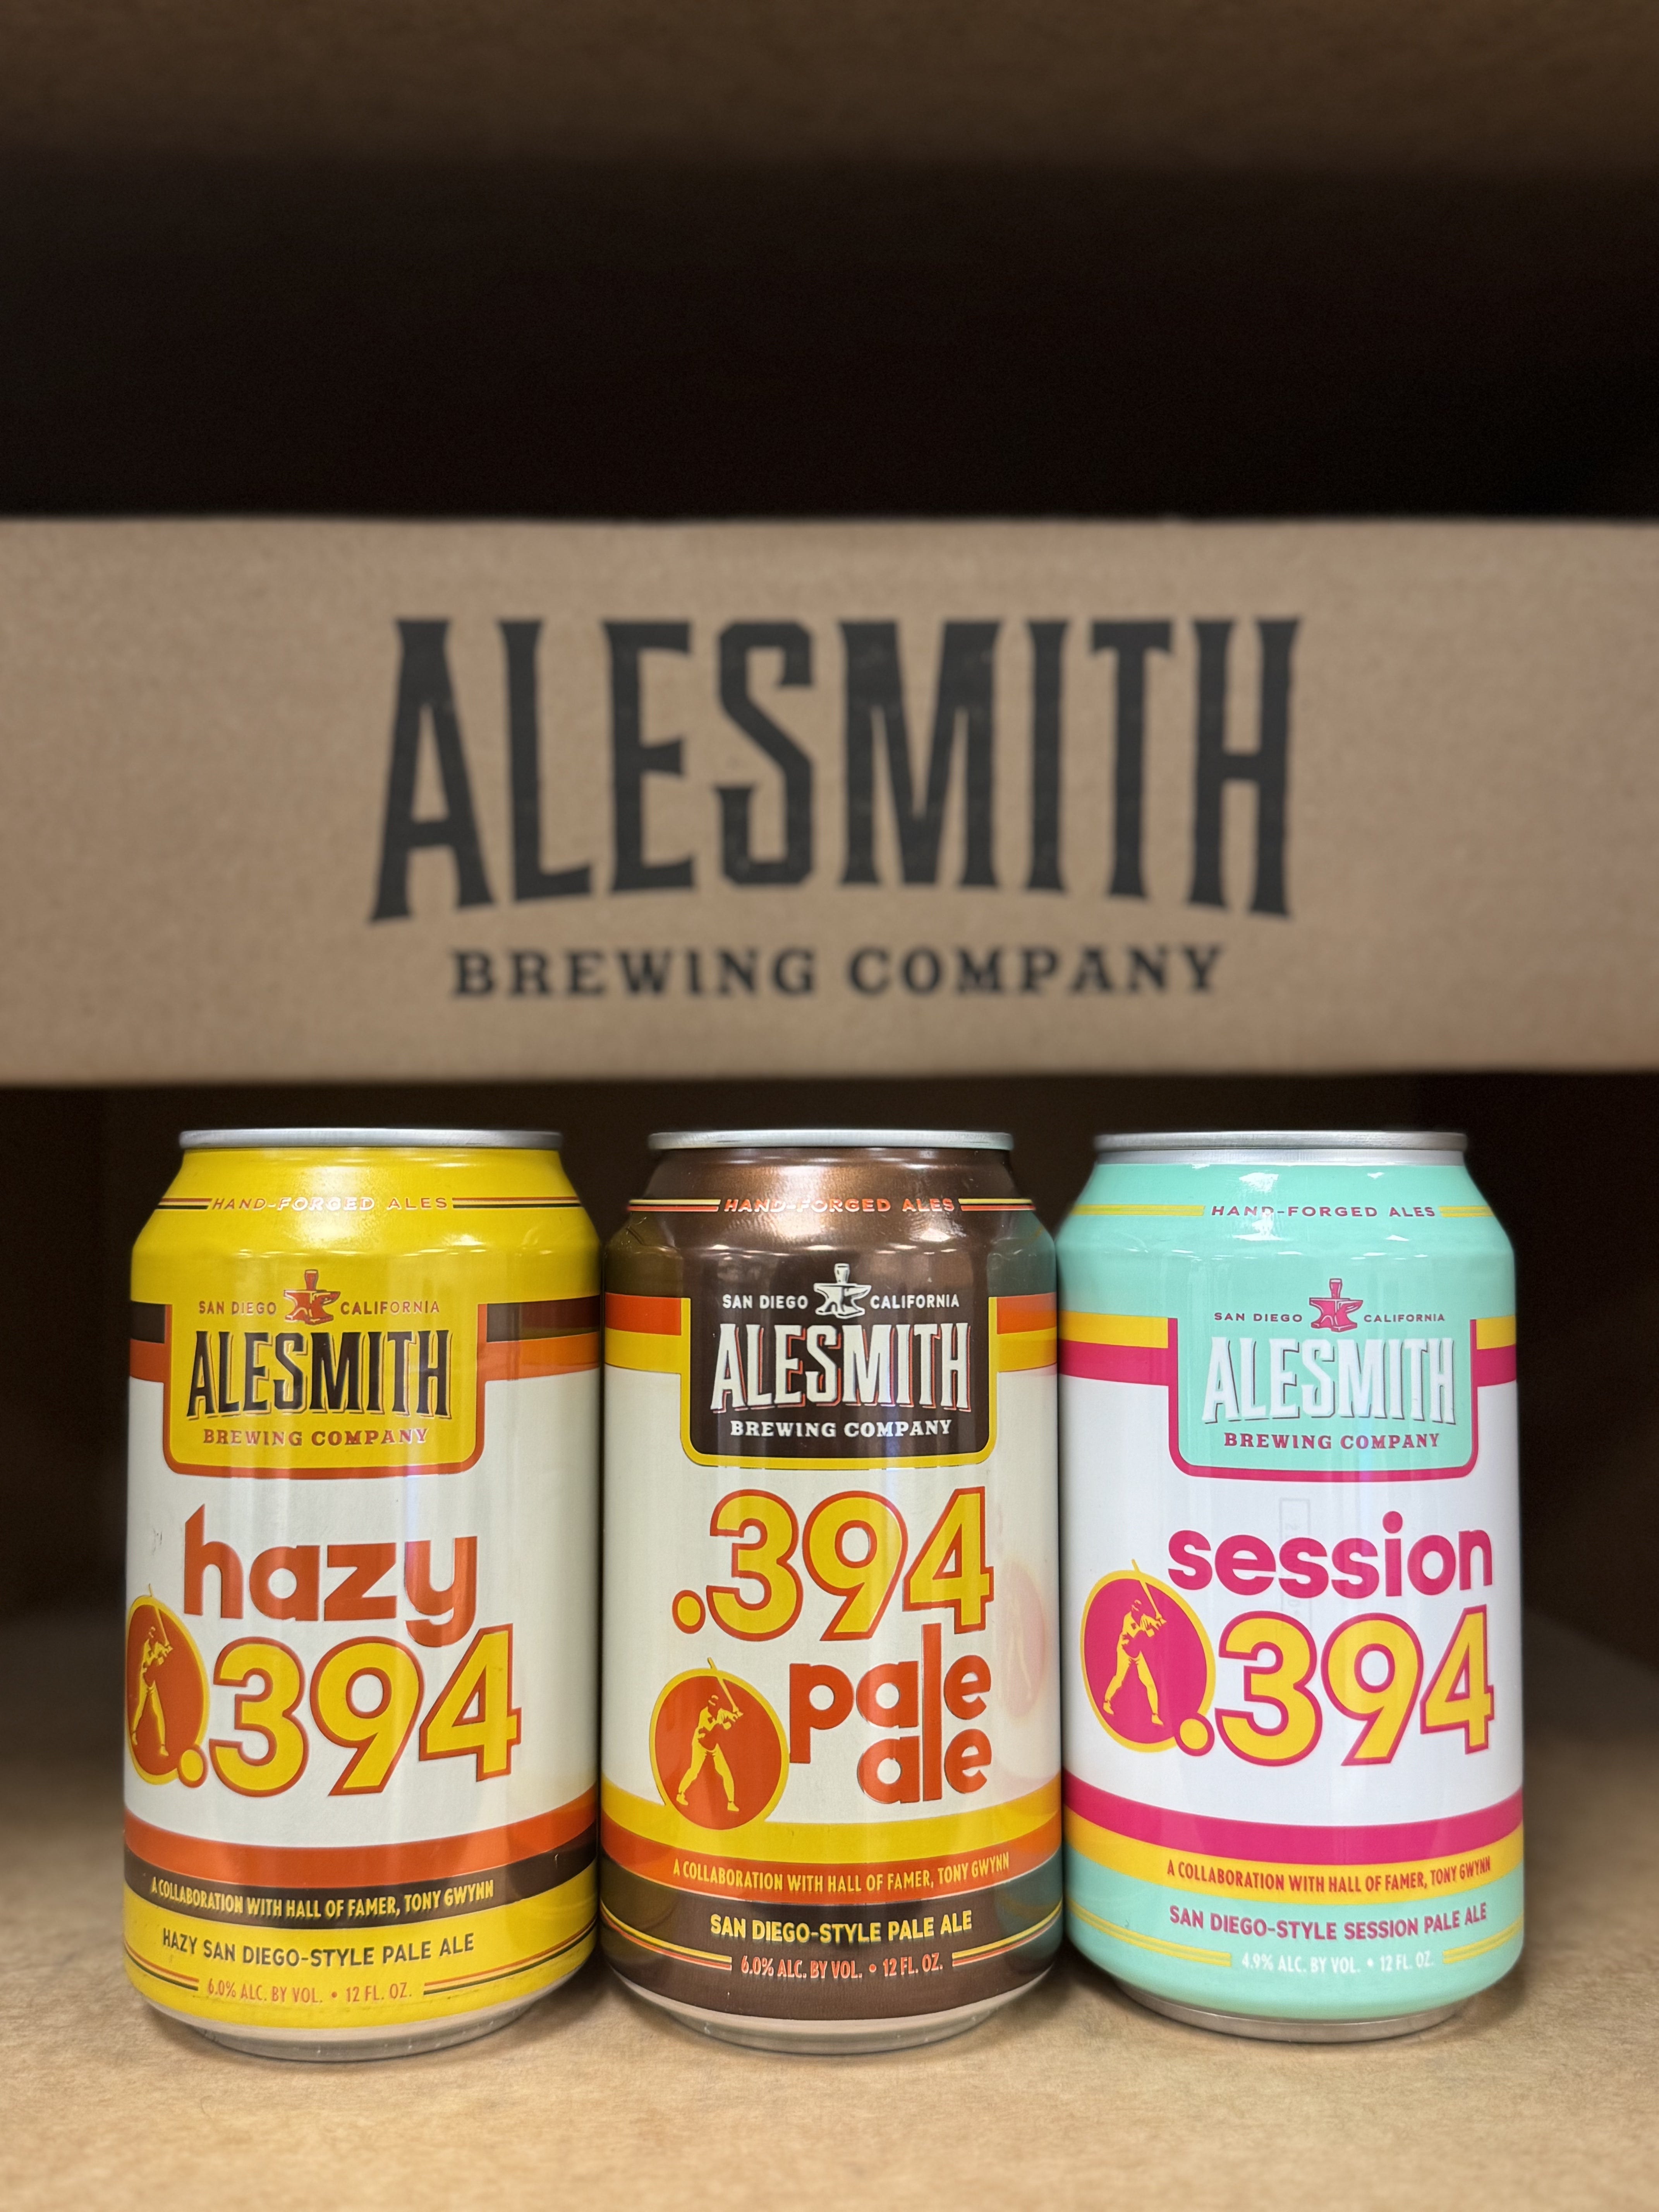 -AleSmith- Alesmith 🚀 Take Off Set 2-Packs & Cases- Only @ Beer Republic - The best online beer store for American & Canadian craft beer - Buy beer online from the USA and Canada - Bier online kopen - Amerikaans bier kopen - Craft beer store - Craft beer kopen - Amerikanisch bier kaufen - Bier online kaufen - Acheter biere online - IPA - Stout - Porter - New England IPA - Hazy IPA - Imperial Stout - Barrel Aged - Barrel Aged Imperial Stout - Brown - Dark beer - Blond - Blonde - Pilsner - Lager - Wheat - Wei